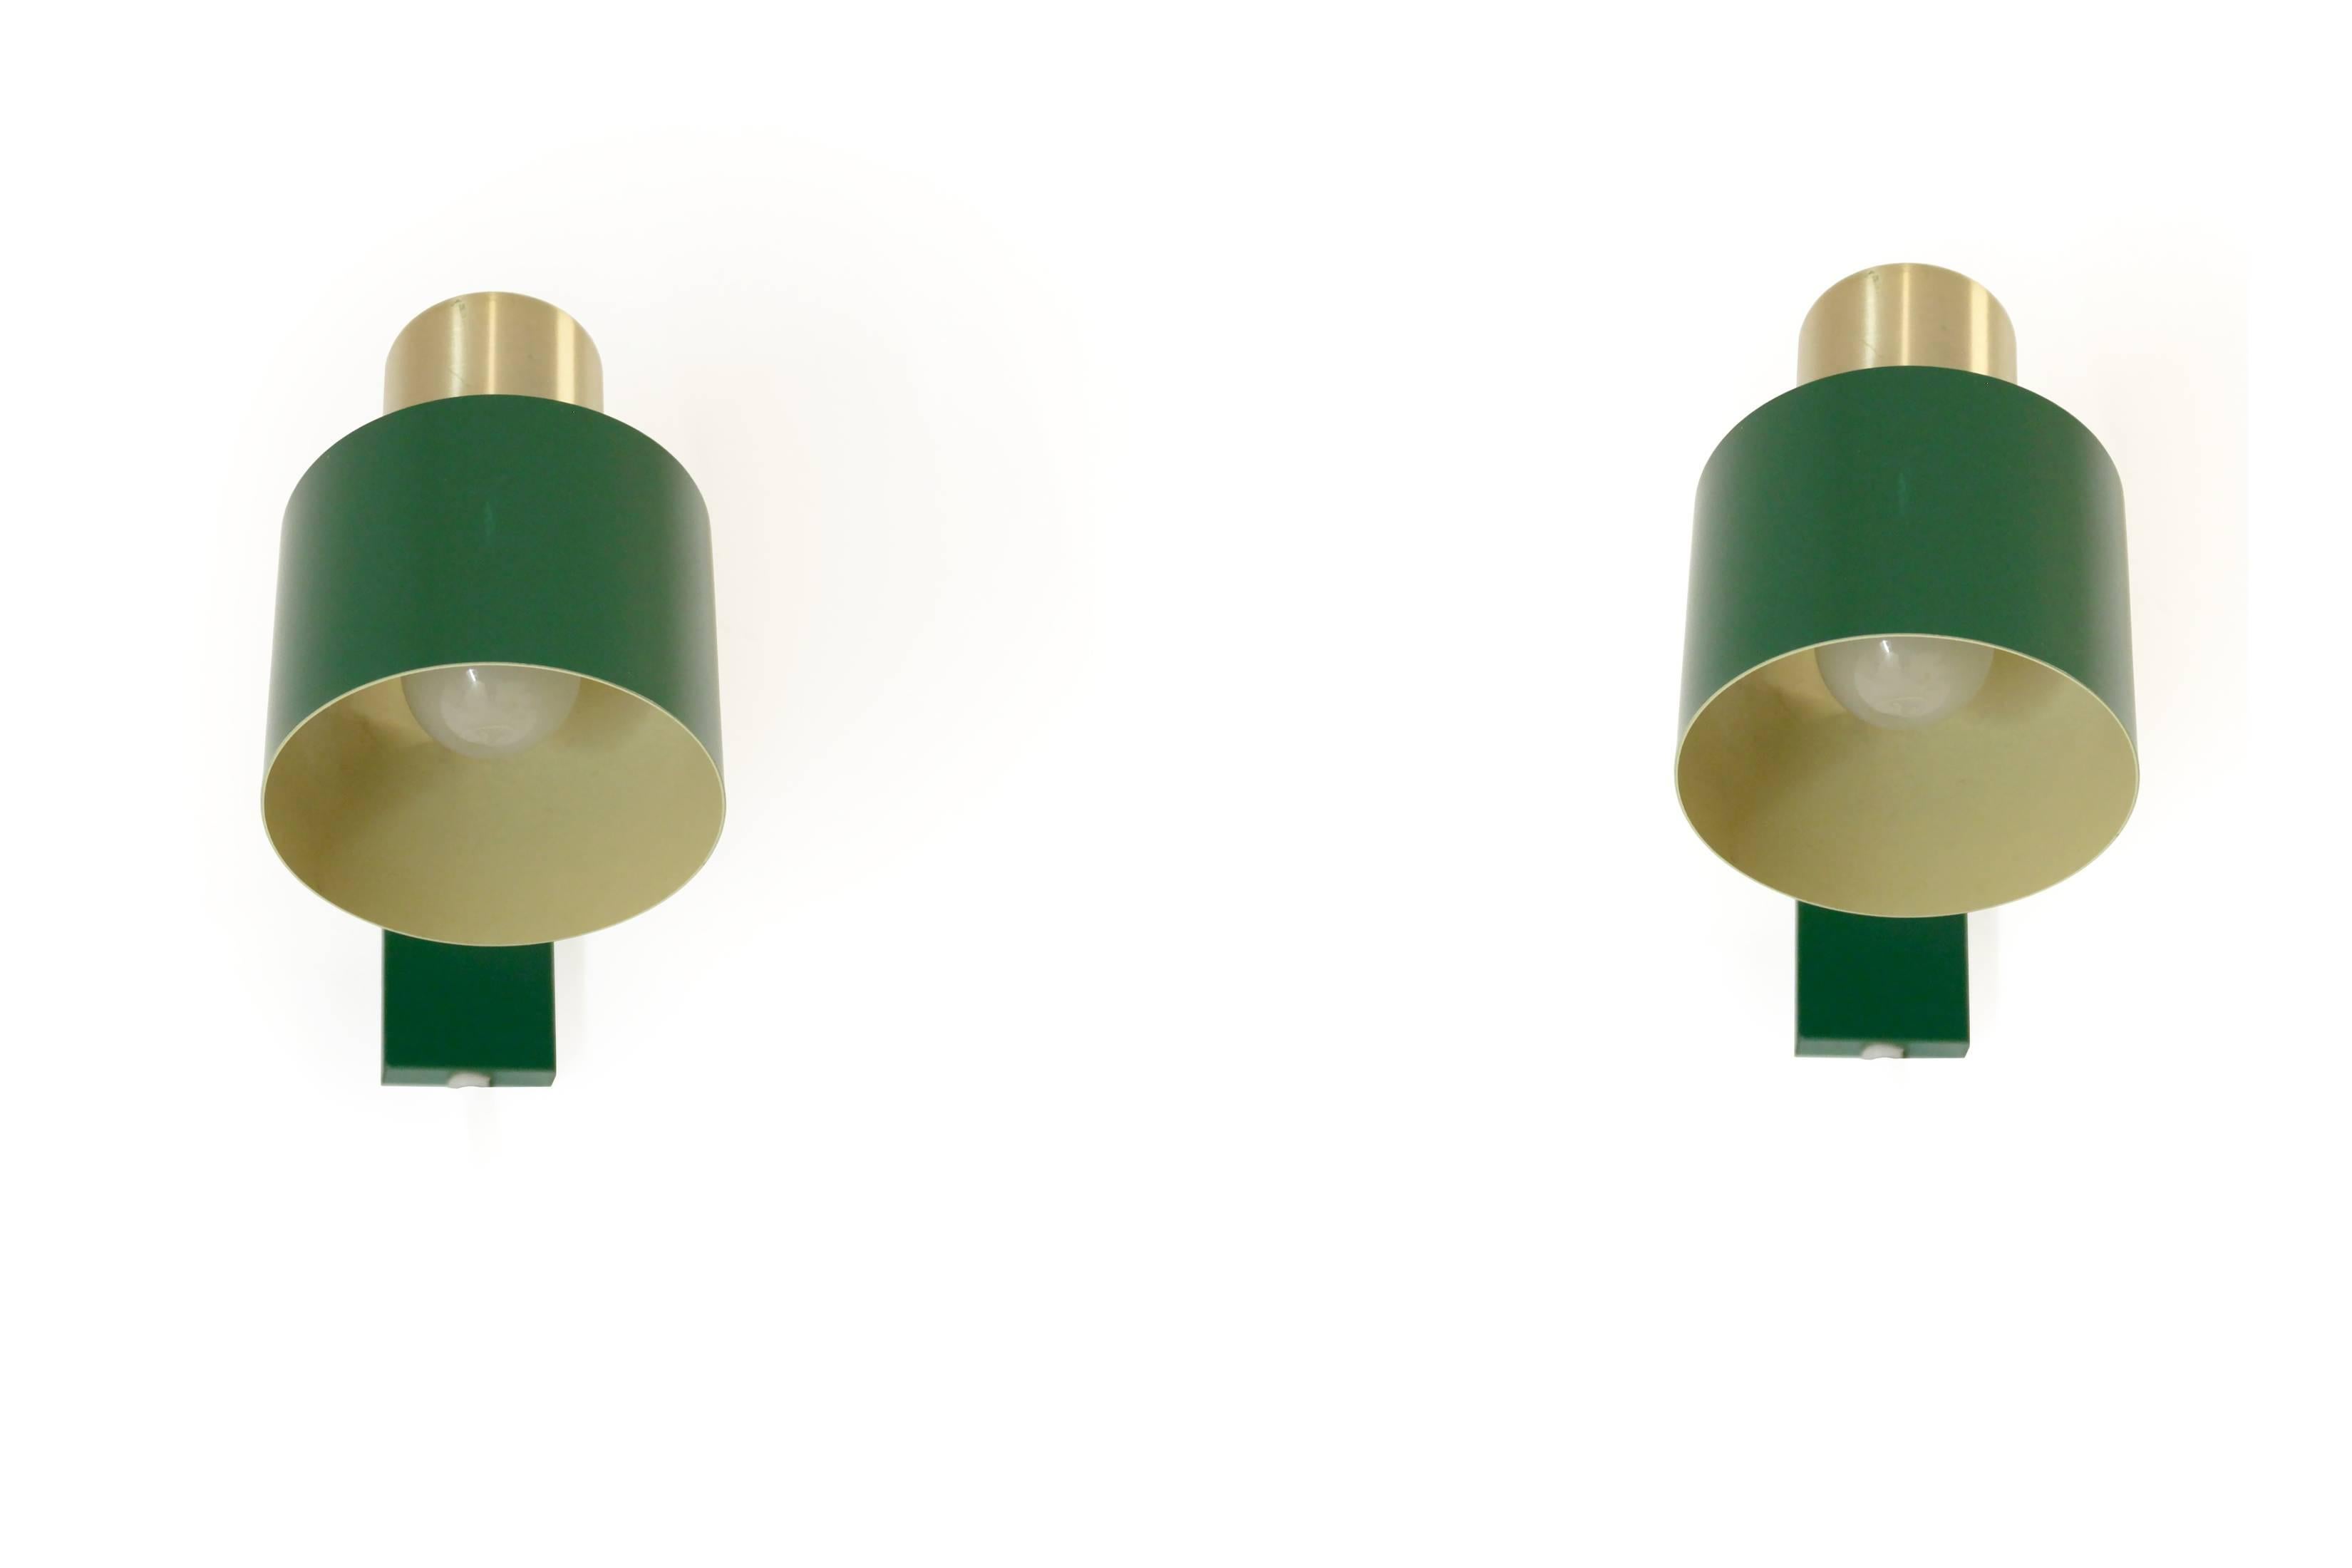 Pair of iconic Danish wall lights in painted steel and brass. This is model 'Alfa'. Designed by Jo Hammerborg and made in Denmark by Fog & Mørup from circa 1970s first half. Both lamps are fully working and in good vintage condition.